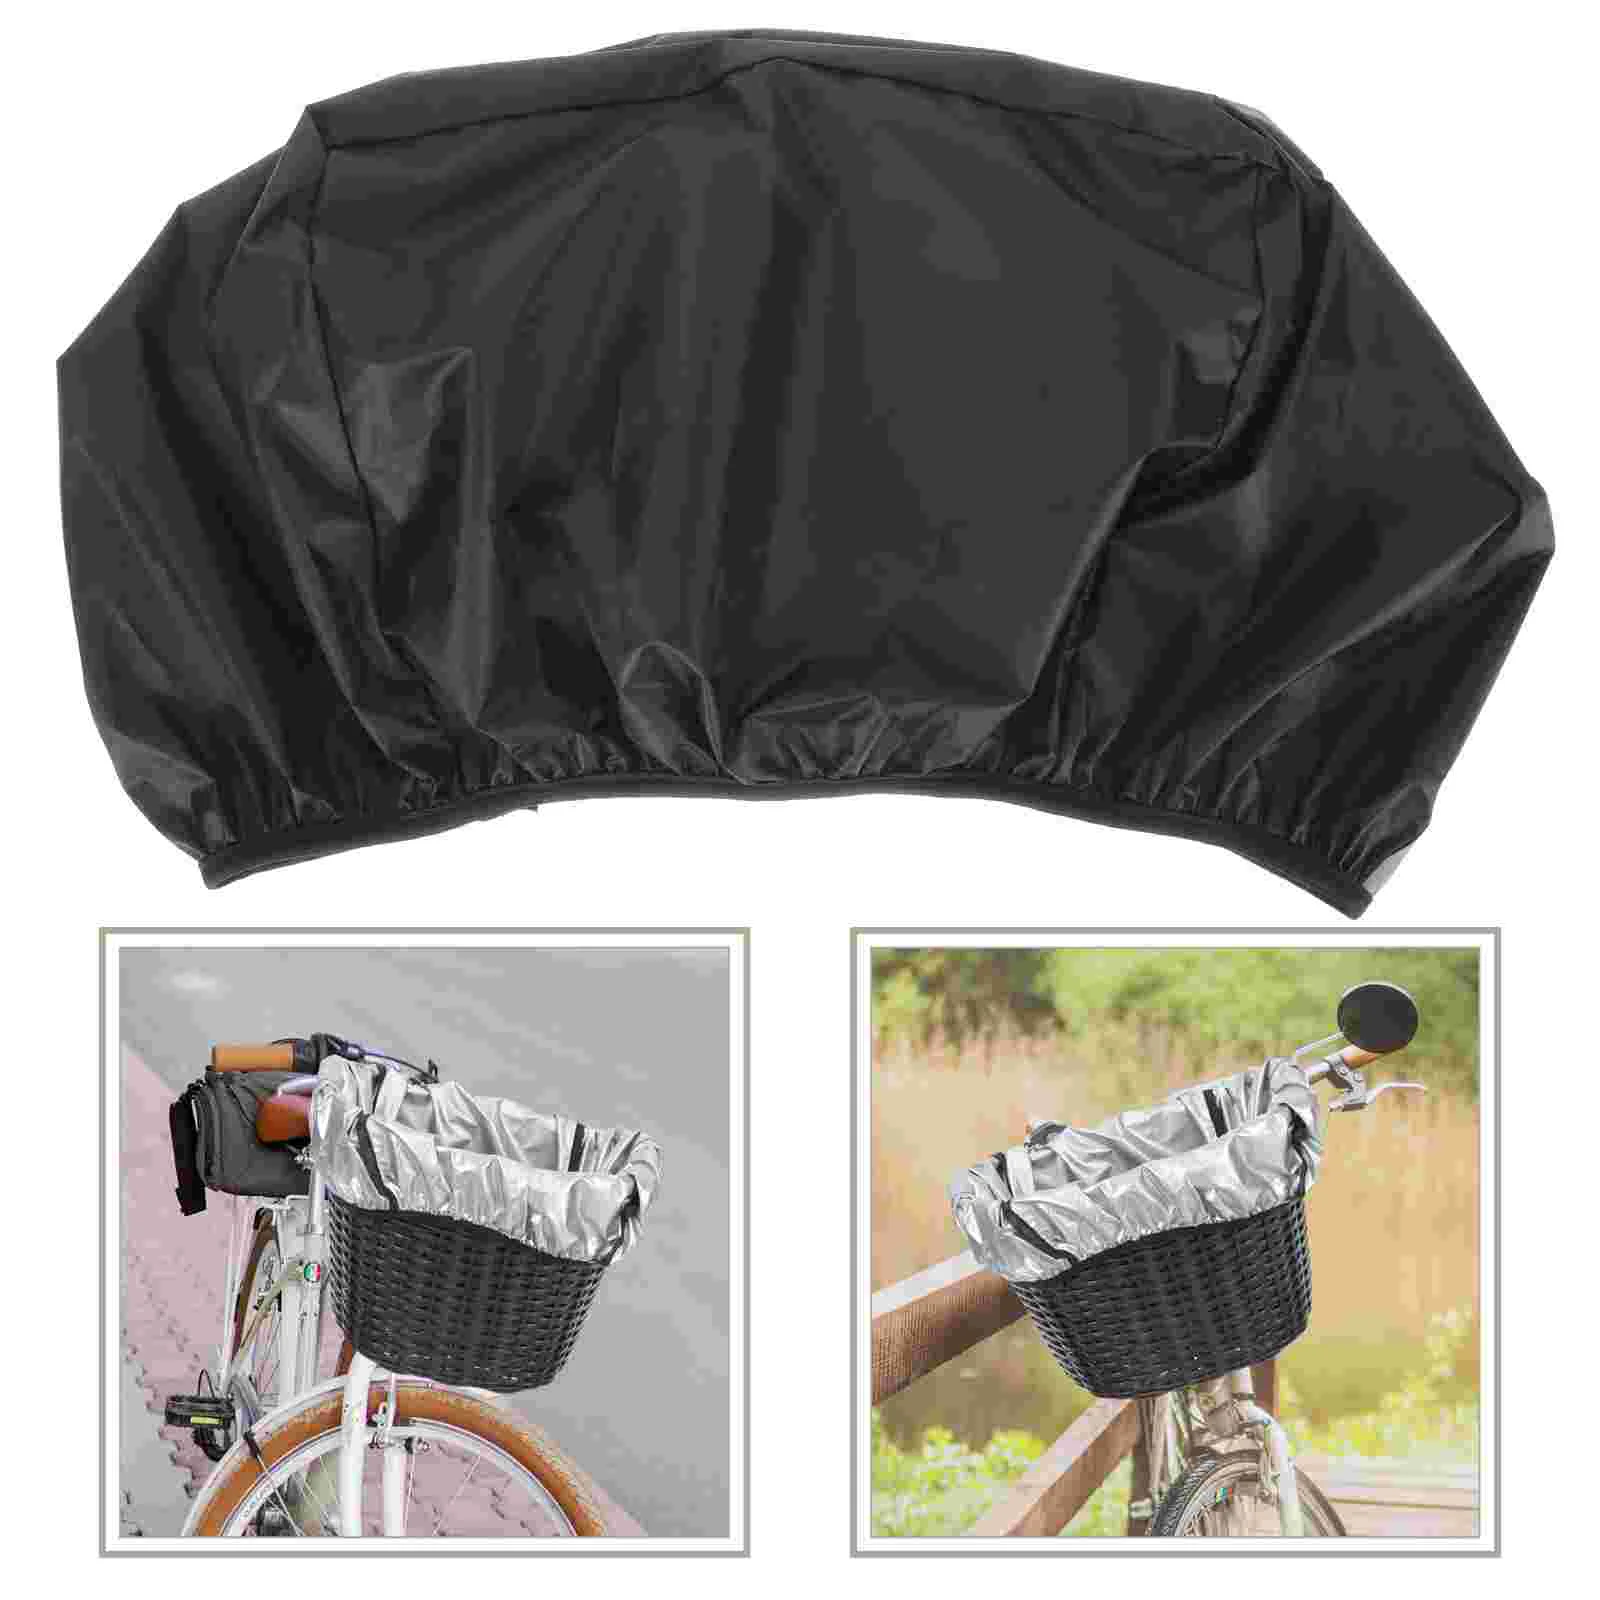 

Basket Rain Cover Collapsible Baskets Waterproof Liner Cycling Oxford Cloth Rainproof Sleeve Foldable